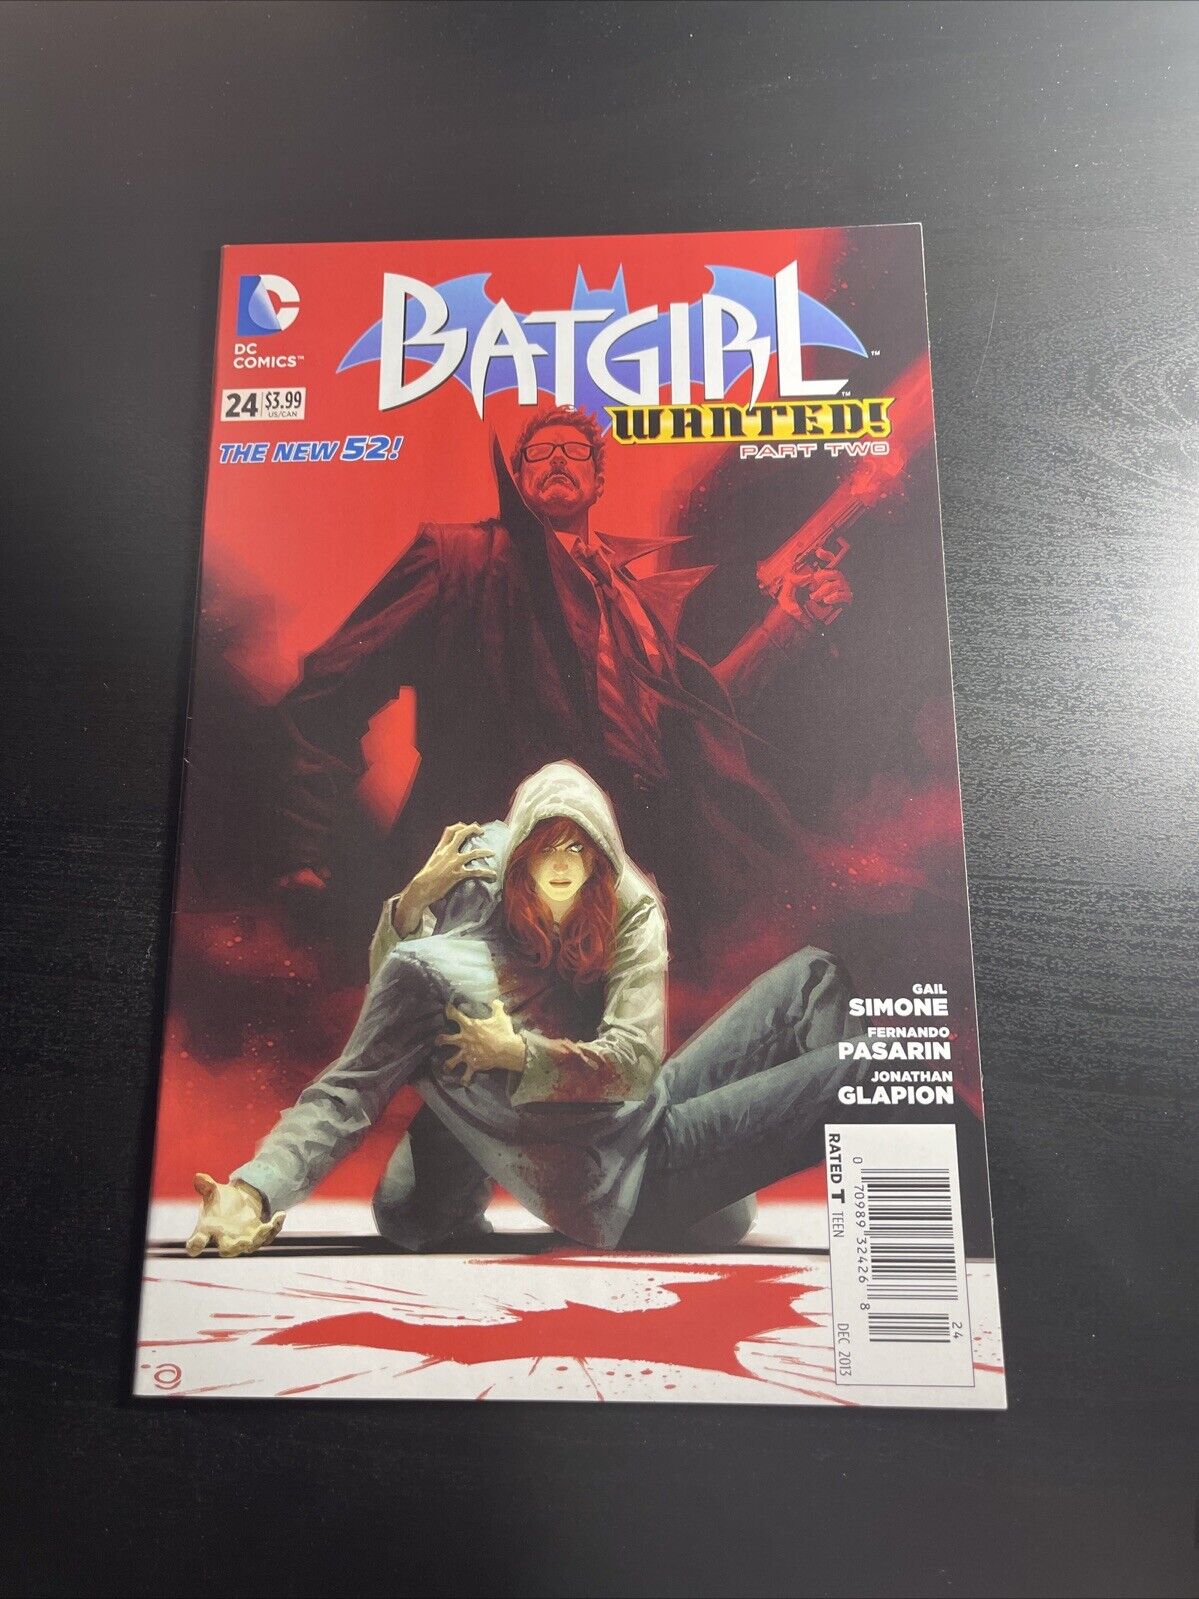 Batgirl #24 (9.2 Or Better) $3.99 Newsstand Price Variant - The New 52 - 2013